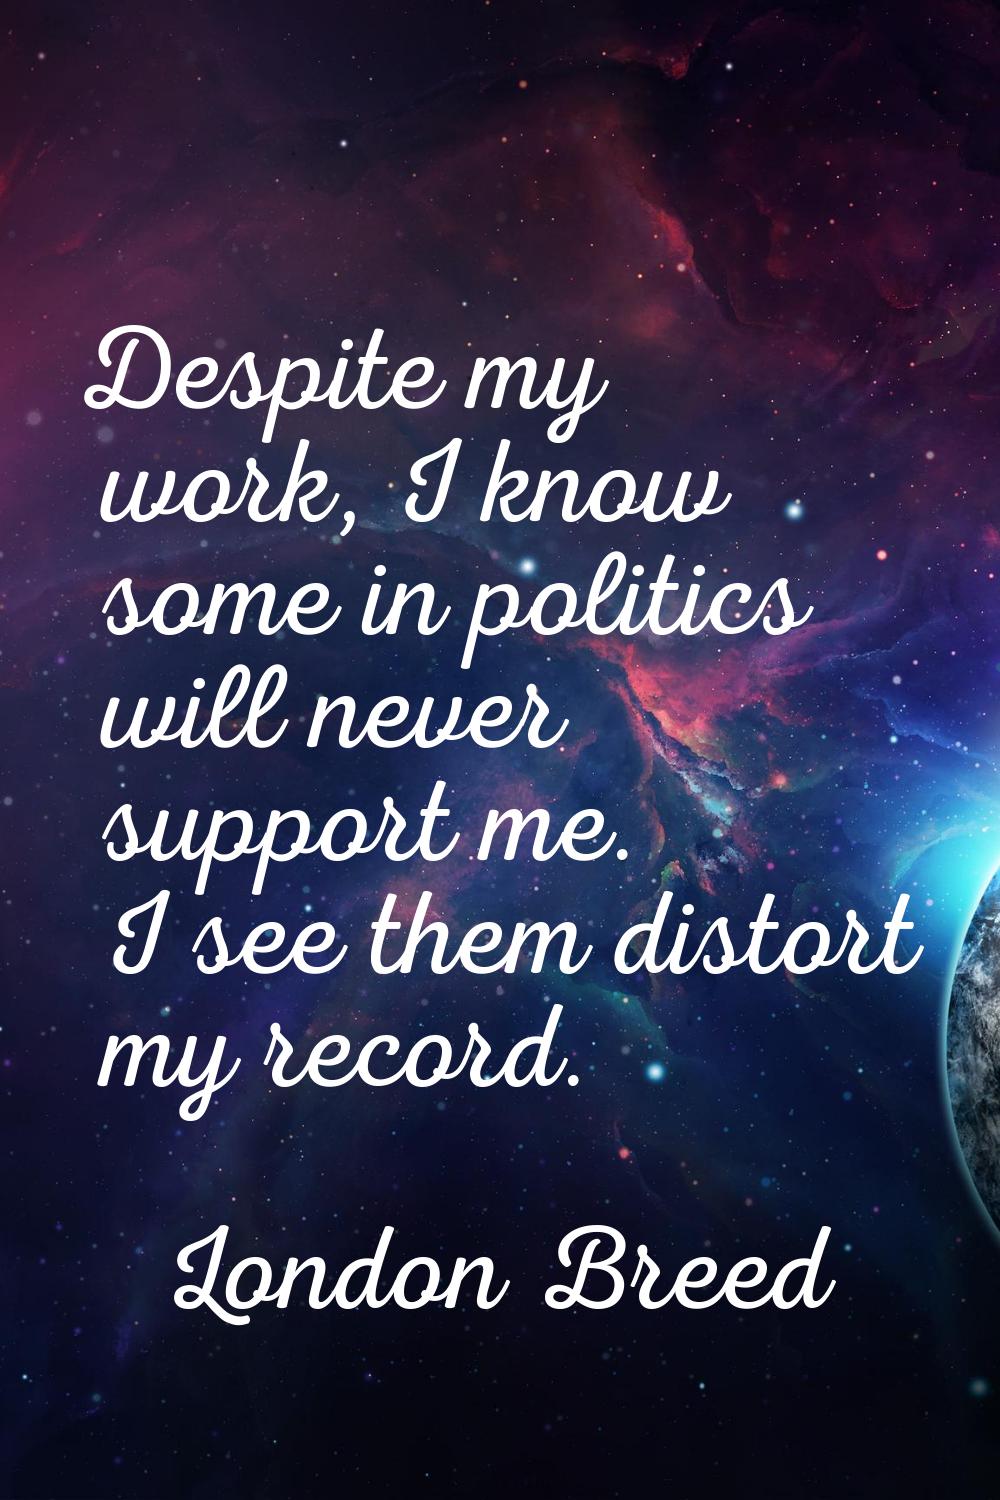 Despite my work, I know some in politics will never support me. I see them distort my record.